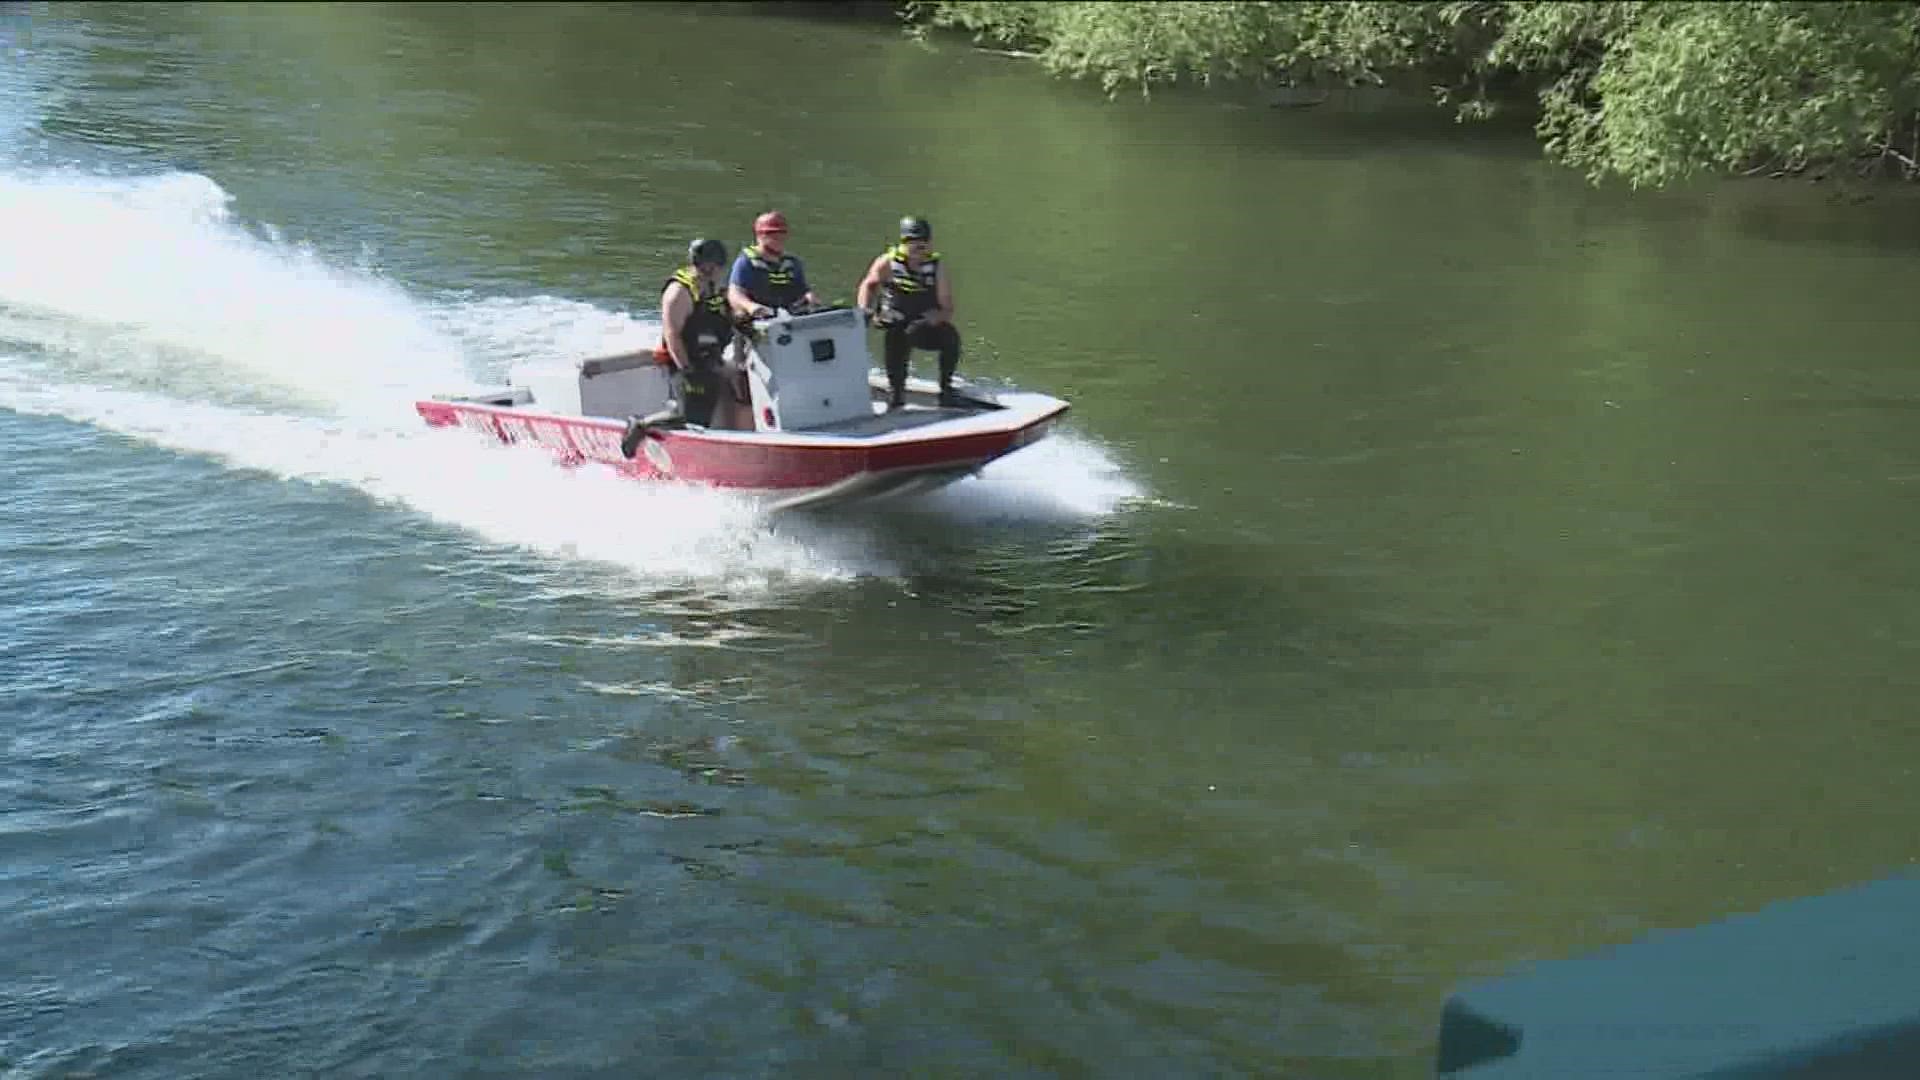 In a span of less than six hours Monday, Boise Fire's Dive Team had 14 rescue assists on the Boise River, including four life-threatening or lifesaving rescues.